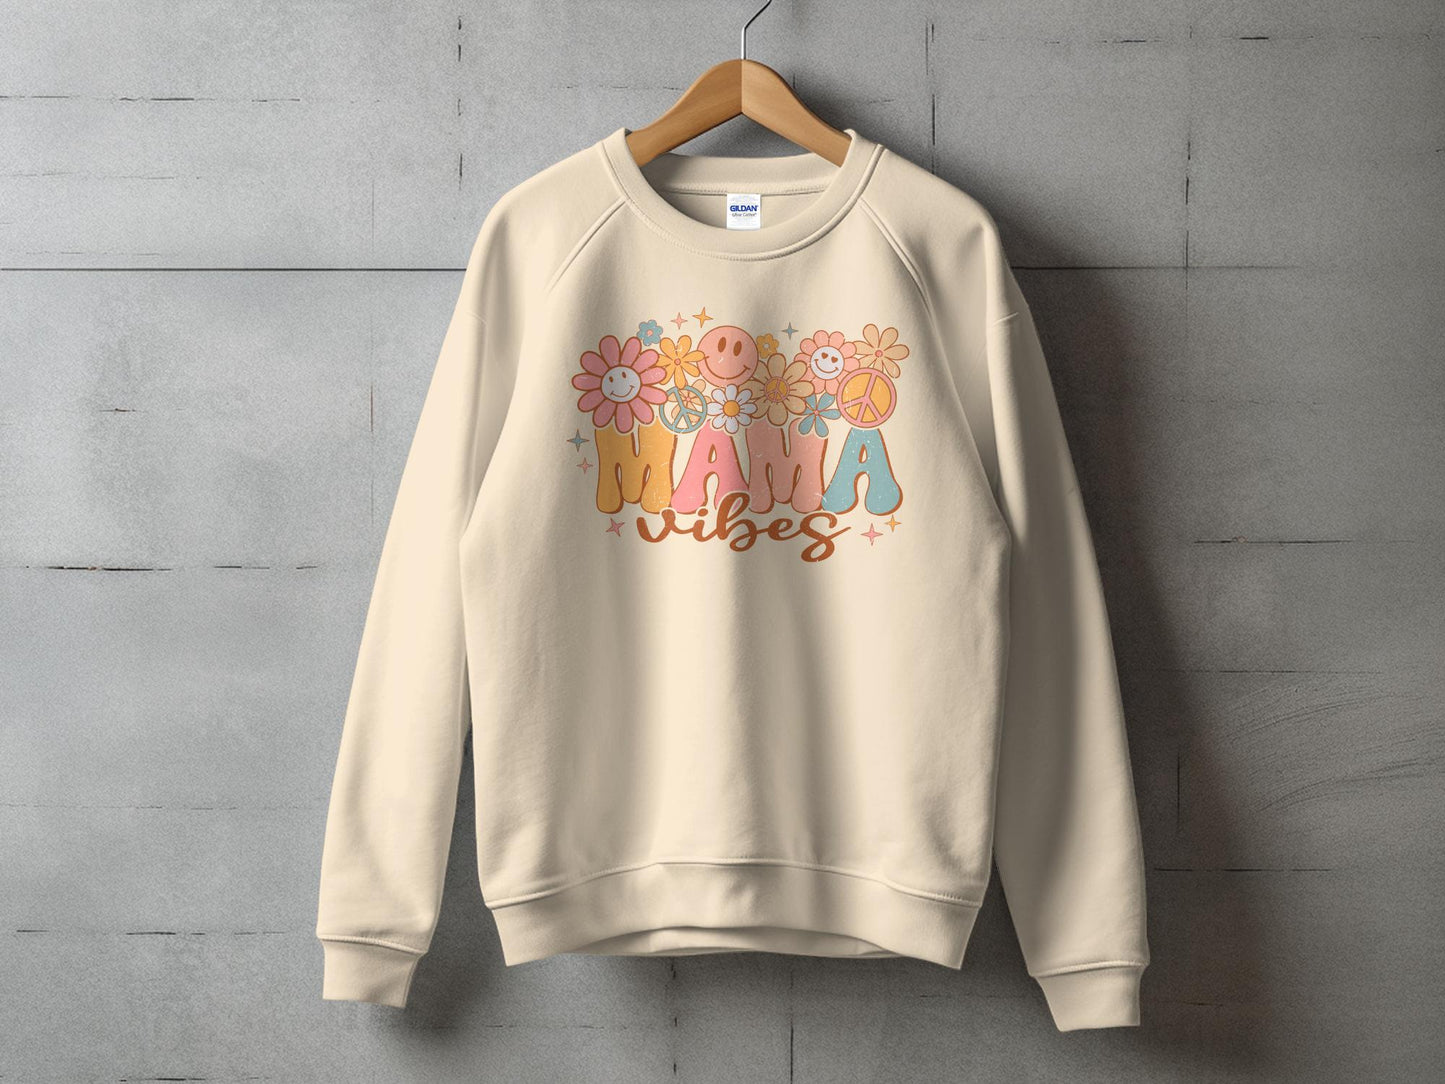 Retro Mama Vibes Sweatshirt, Vintage Inspired Floral Mom Sweater, Boho Chic Mother's Day Gift, Comfy Casual Pullover